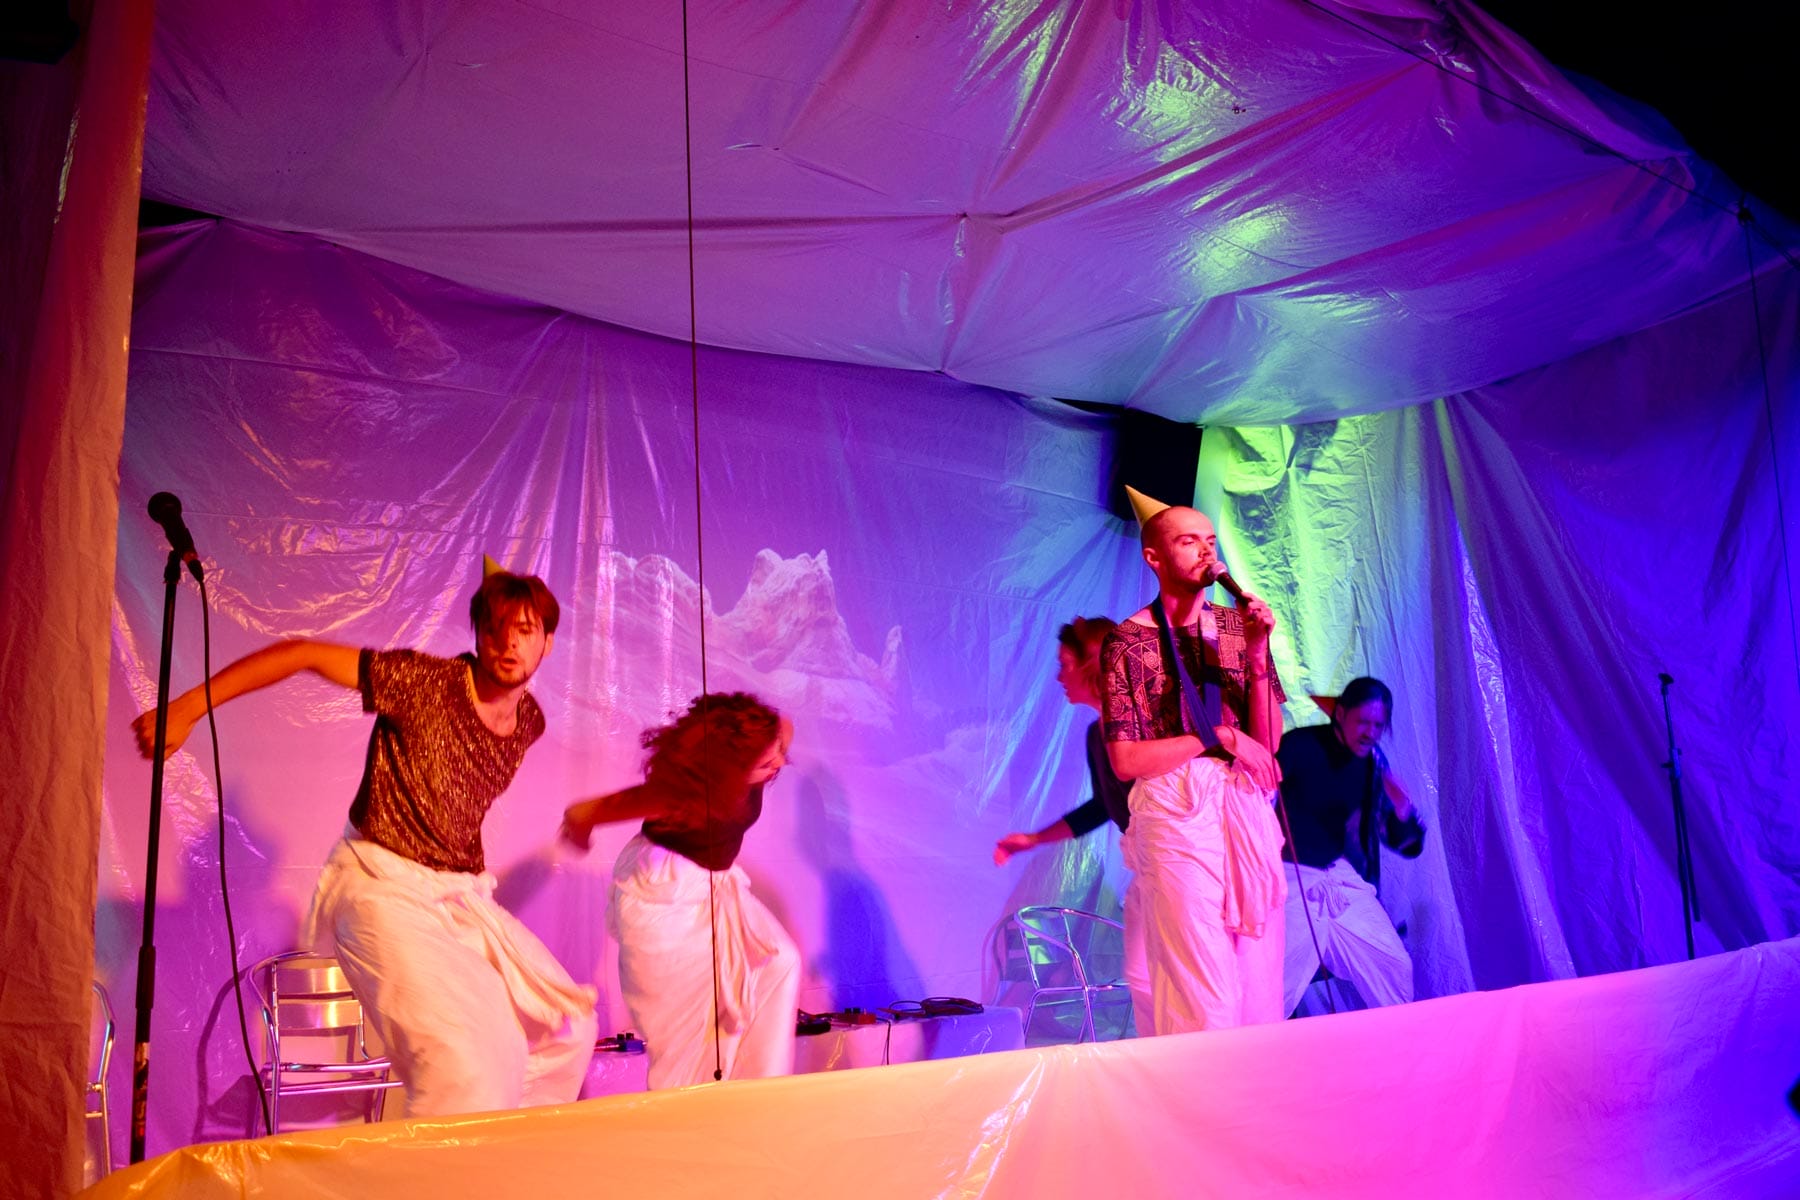 A group of performers on a stage covered in white plastic sheeting, they wear white boiler suits tied at the waist. One wears a sling and a party hat, the others are dancing energetically.